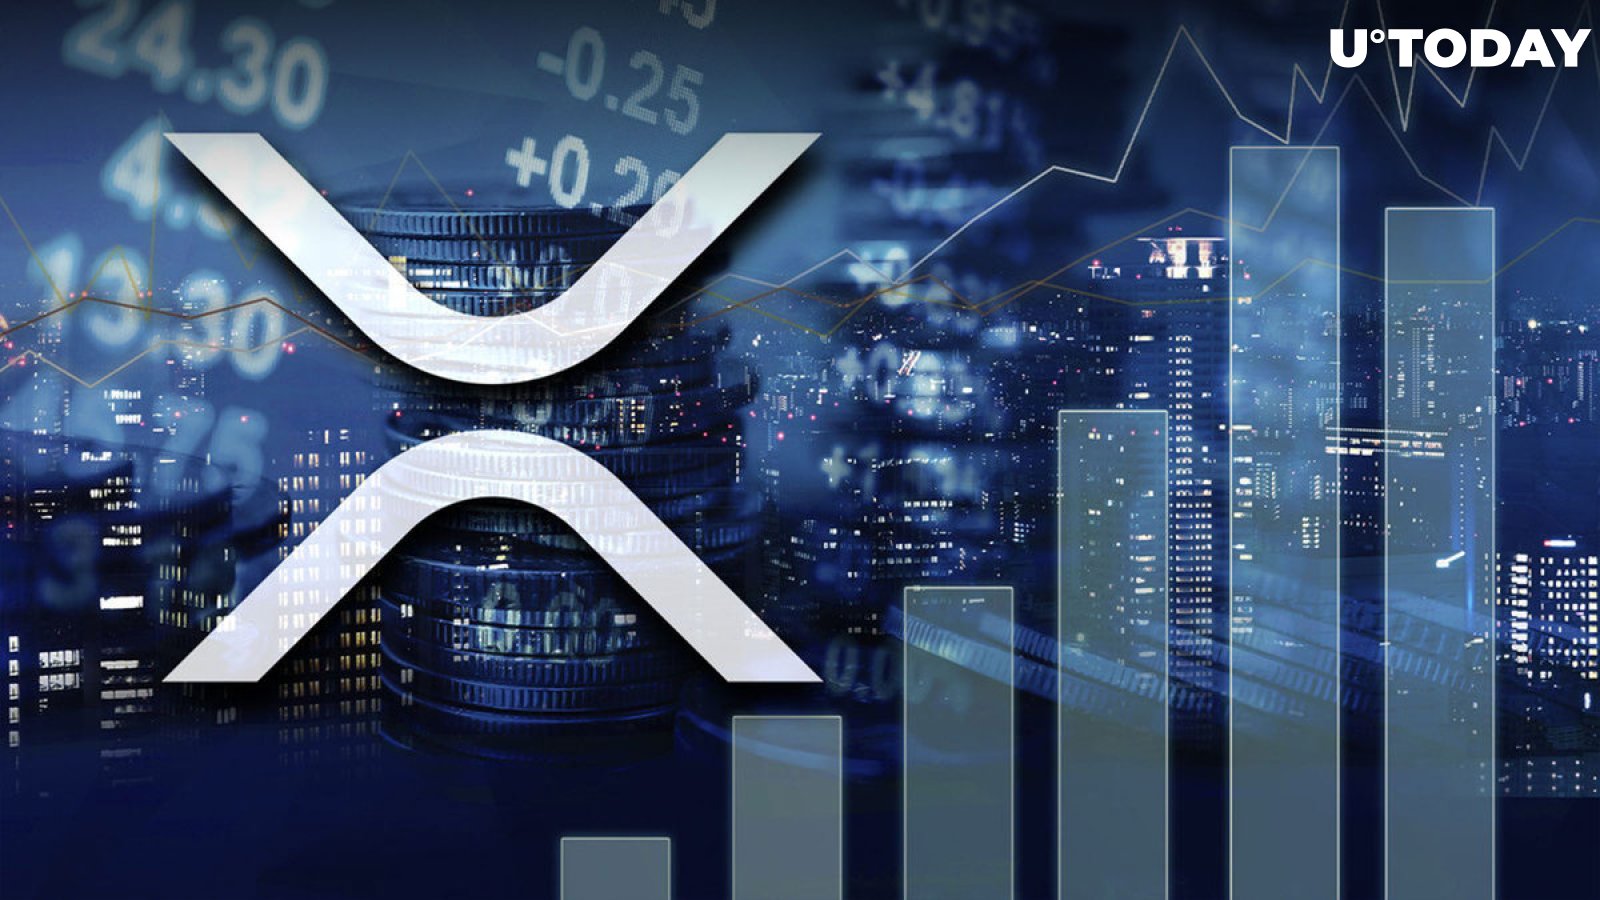 XRP Absorbs Investors' Cash as Crypto Fund Flows Skyrocket with $124 Million Surge